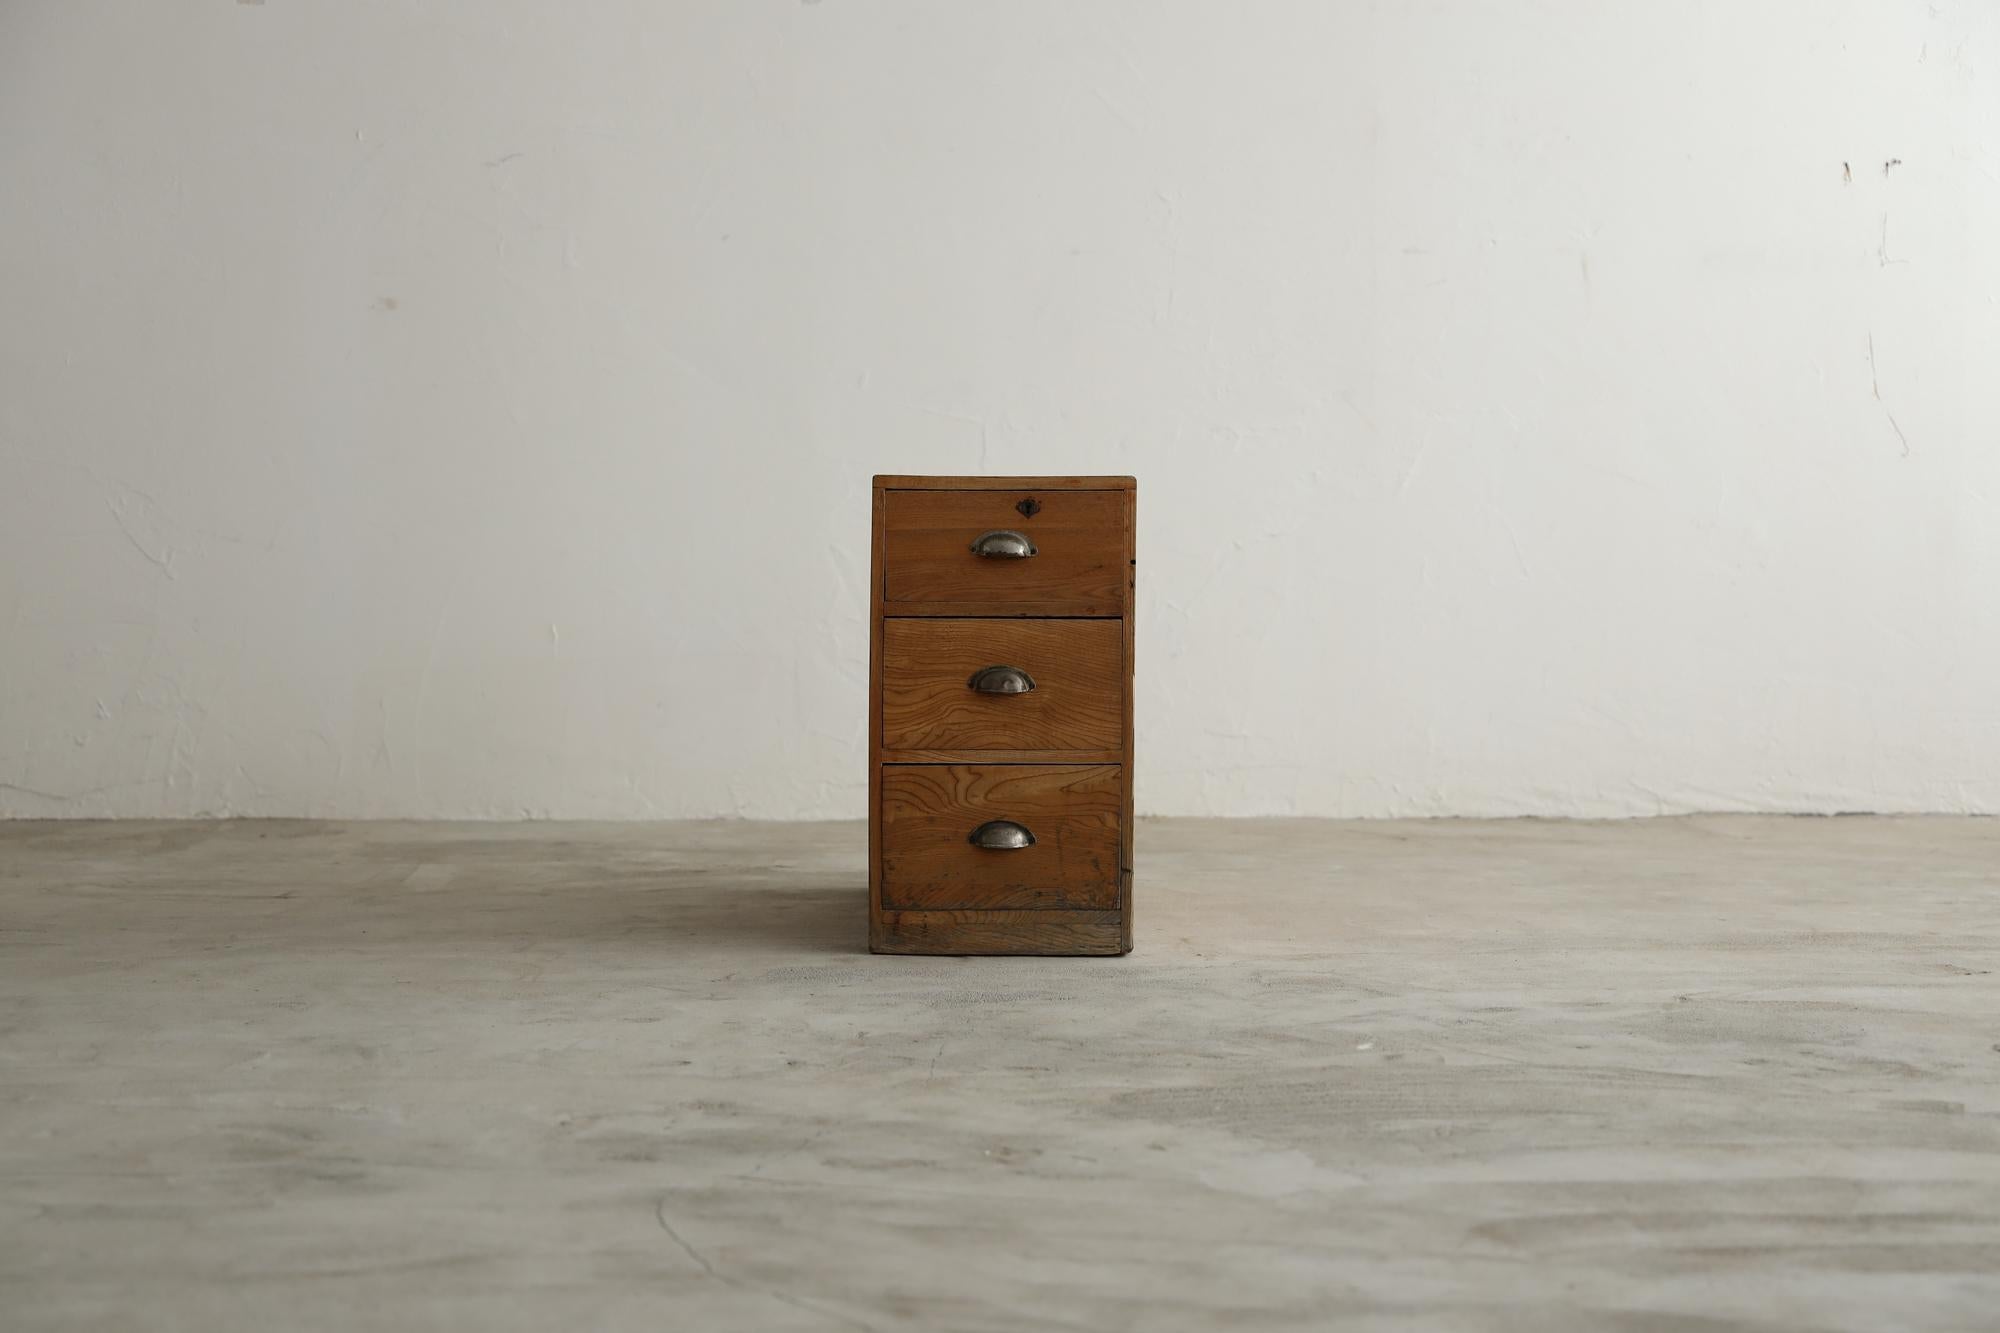 This is an antique Japanese Drawer from the Taisho era, This furniture was made with the same tradition and advanced techniques as Japanese shrines. 

The aged Sen wood gives it a rustic yet refined appearance, with a depth that enhances its